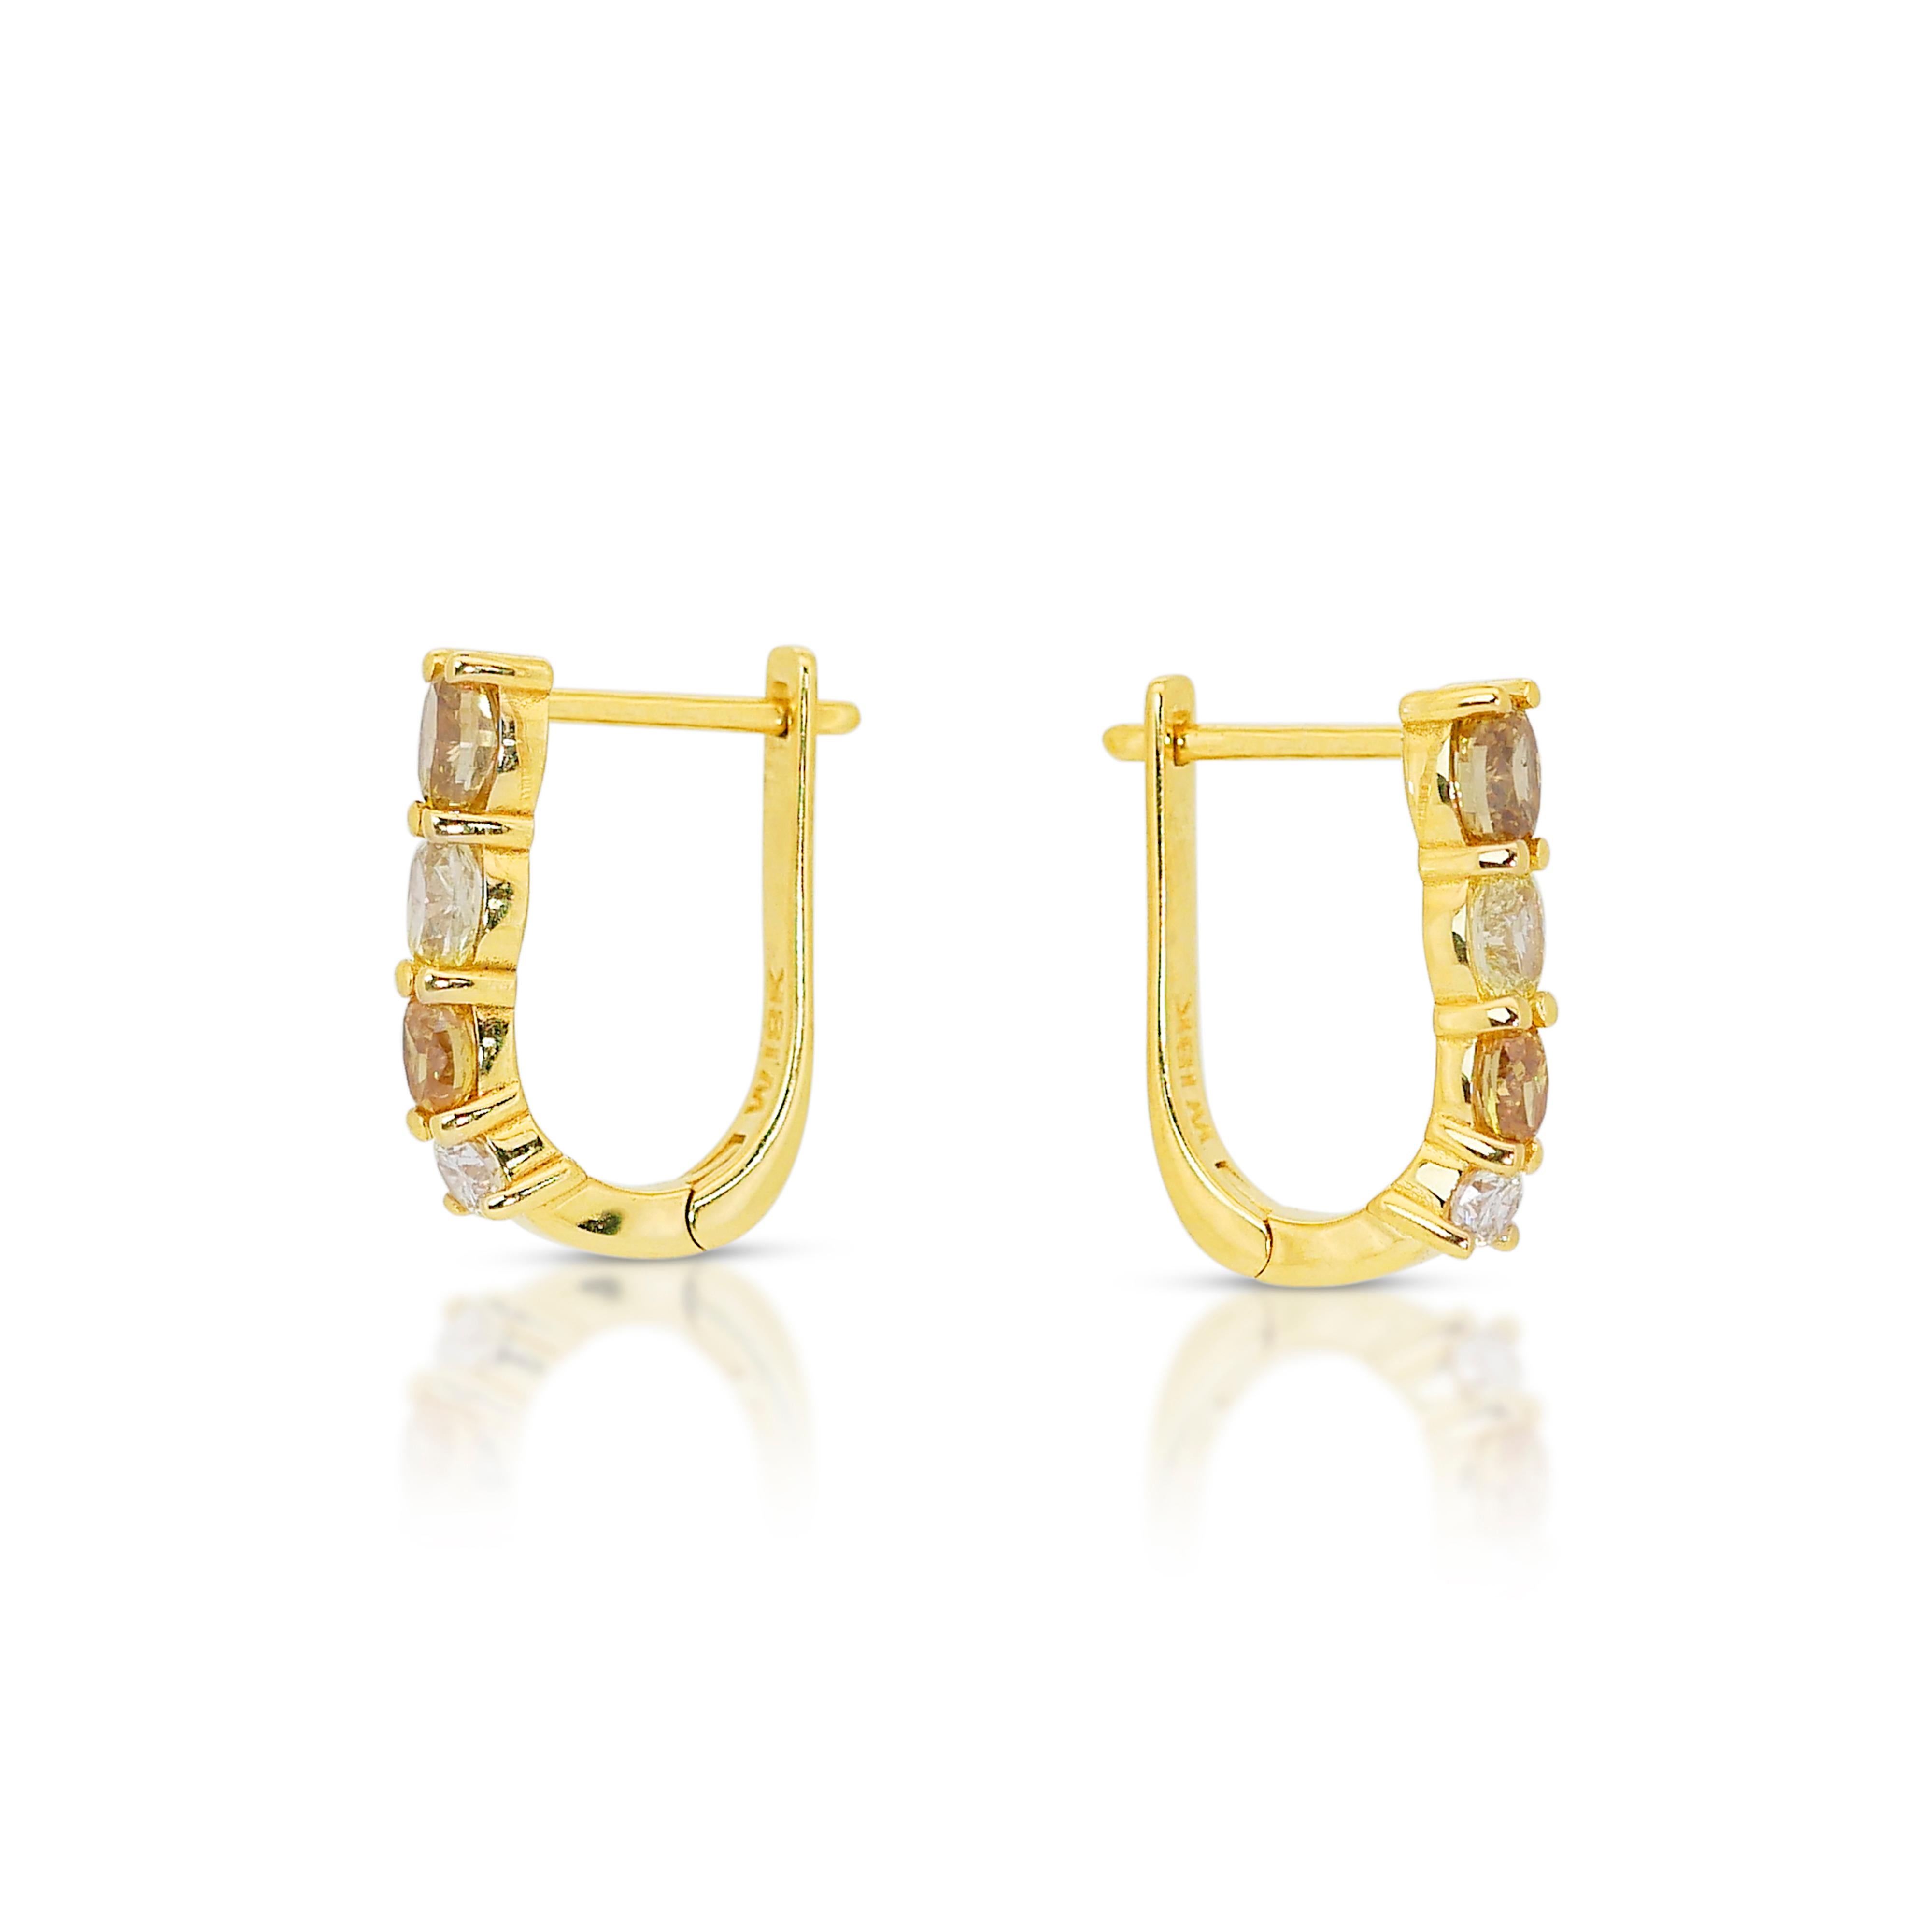 Radiant 1.44 ct Fancy Colored Diamond Earrings in 18k Yellow Gold - IGI  In New Condition For Sale In רמת גן, IL